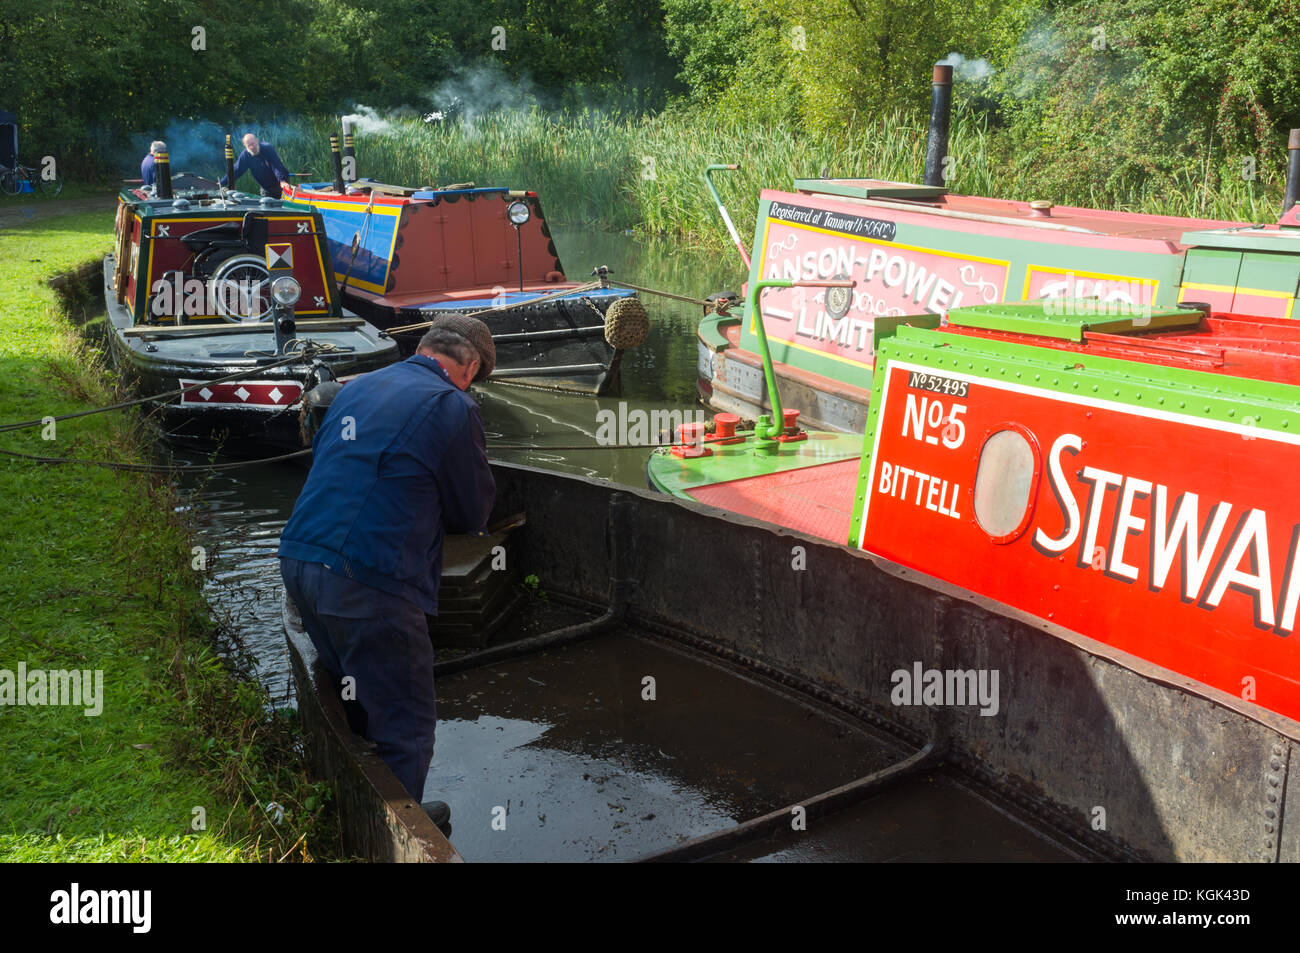 Black Country canal festival, West Midlands, Regno Unito Foto Stock